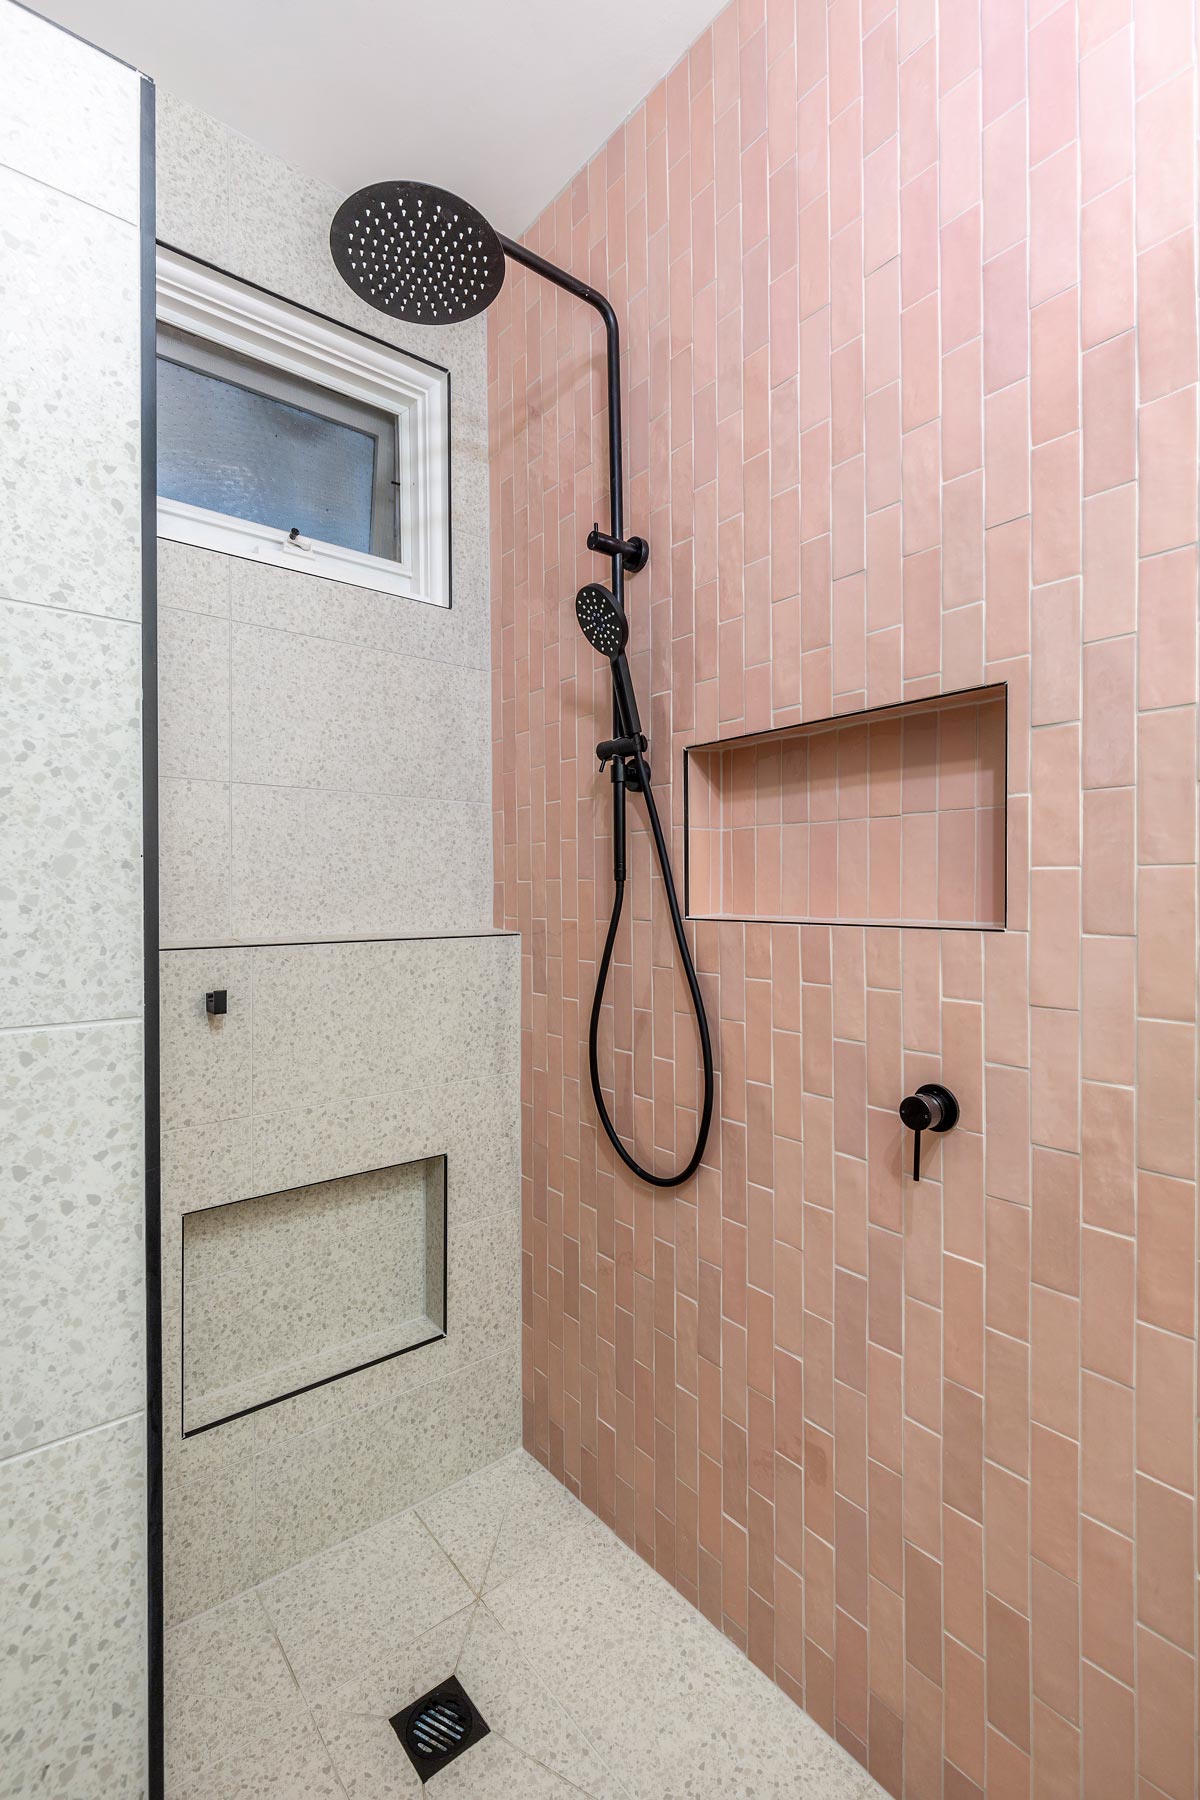 Shower Head and Pink Bricked Wall - Bathroom Renovation in Melbourne